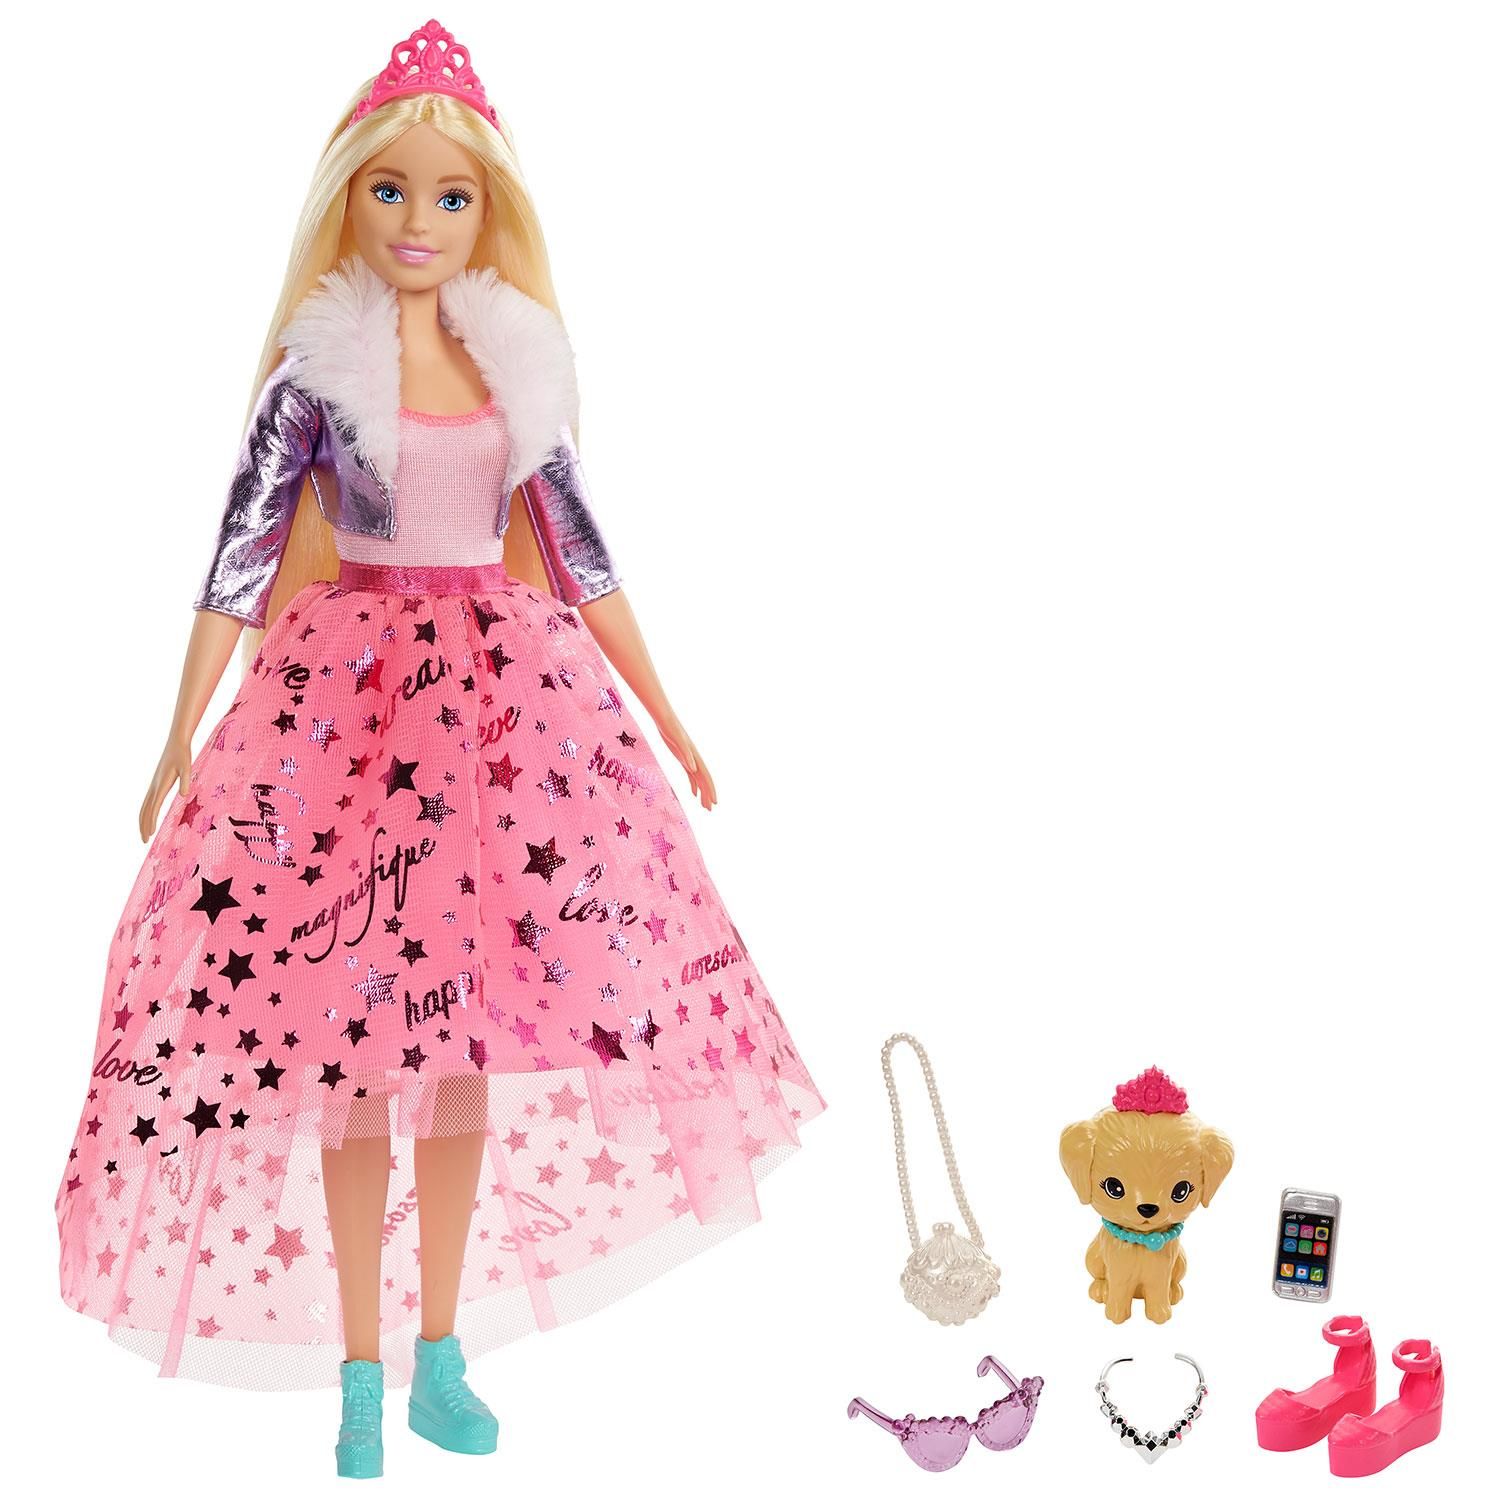 Barbie dolls inspired by Barbie Princess Adventure help transport young imaginations into lands far, far away. This Barbie doll is sporting a trendy pink top and high-low skirt as her doll outfit. The graphics on the doll shirt read “believe”, “happy”, “dream” and more. Barbie’s puppy tags along in her fashion fairy tale, with her own tiara and collar to dress up in! With Barbie Princess dolls, young dreamers will love imagining all sorts of stories to play out. These Barbie® dolls cannot stand alone. Colors and decorations may vary.

The Barbie Princess Adventure dolls and playsets take little imagination to faraway lands.
The Barbie doll comes dressed as a princess in a sparkly skirt, metallic jacket, and bright blue high tops!
Doll accessories include a pink tiara, sandals, purses, sunglasses, necklaces, and a smartphone.
This Barbie princess doll comes with a royal puppy friend with her own tiara and collar, keeping with the fantasy look!
Kids can collect more Barbie® Princess Adventure™ dolls and toys to create even more fantastical stories.
These Barbie playsets and dolls make great gifts for kids aged 3 and up.

Box Contains: 1x Barbie® Princess Adventure Doll with Puppy Toy